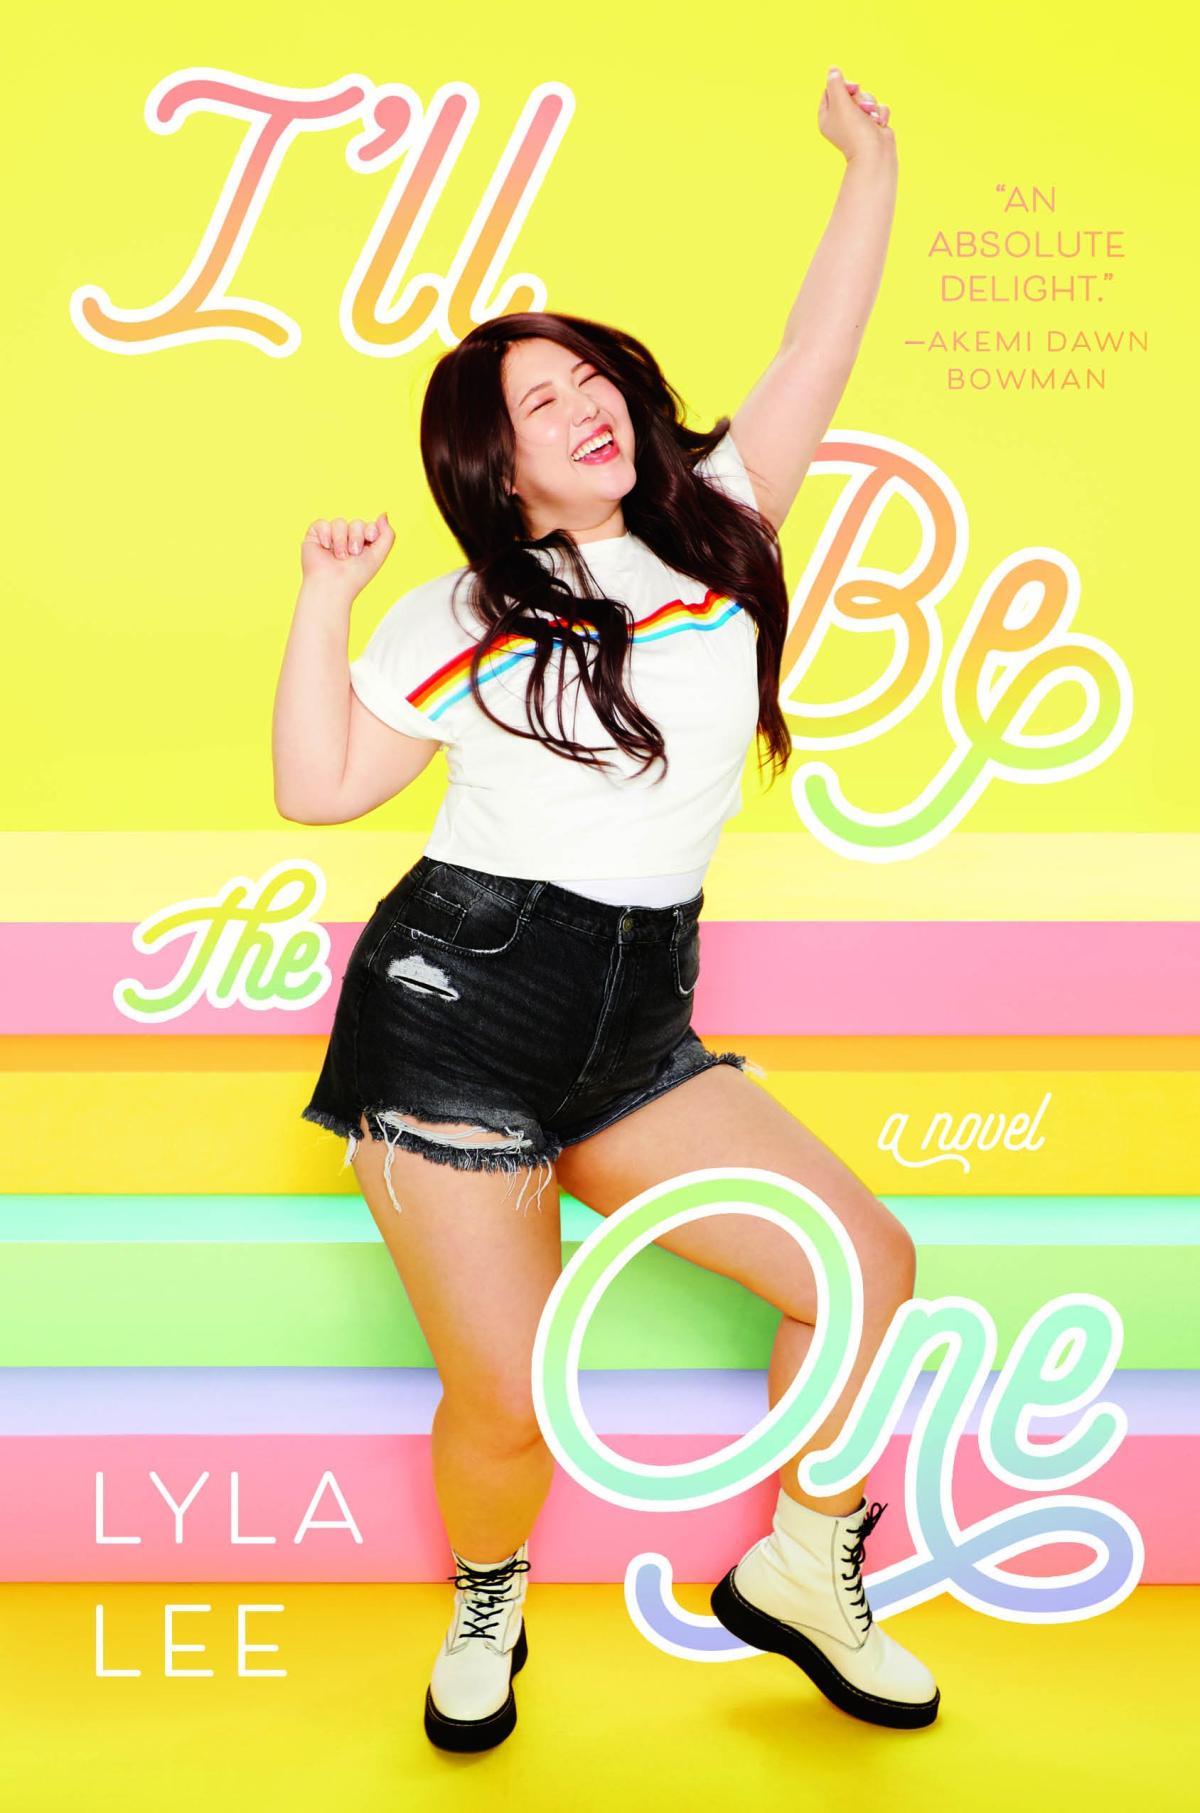 I'll be the one by Lyla Lee